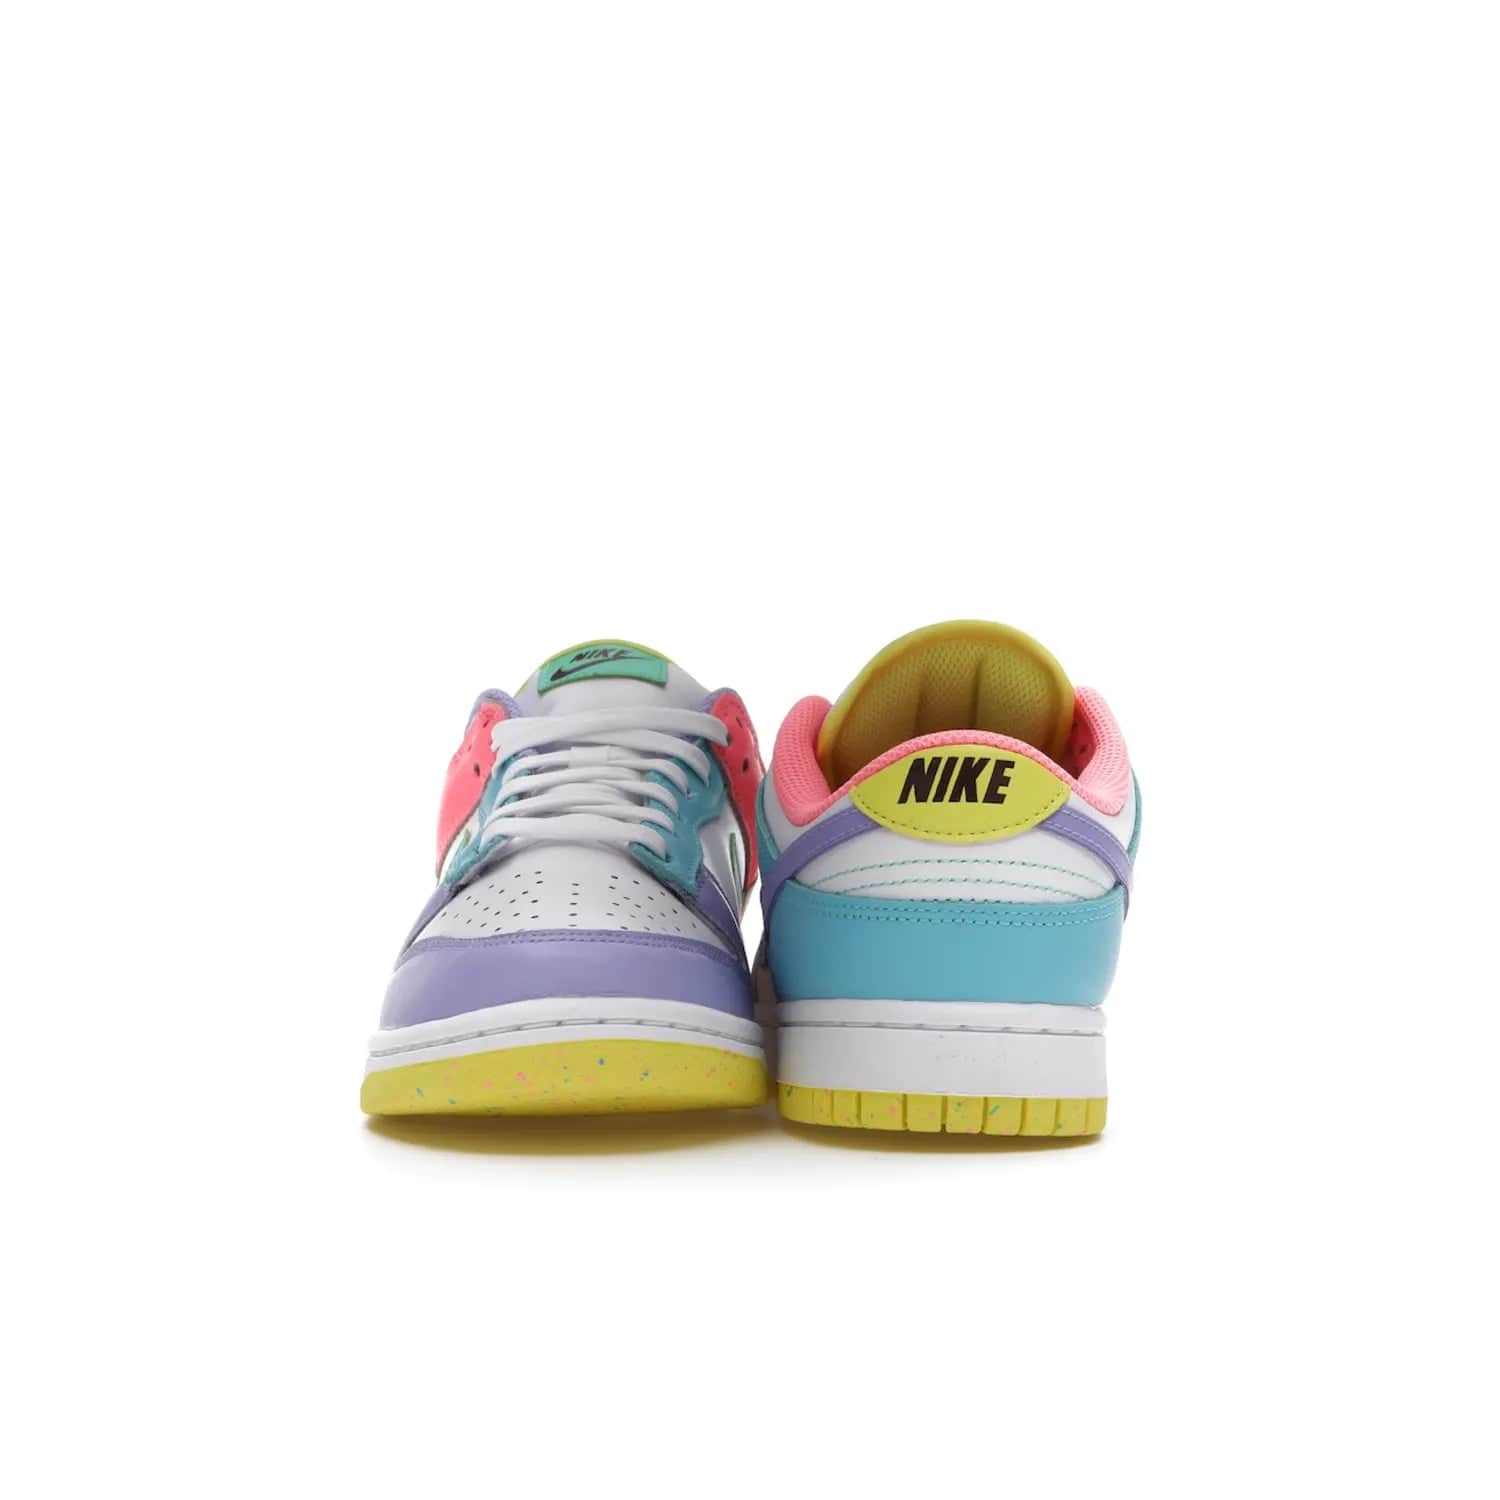 Nike Dunk Low SE Easter Candy (Women's) - Image 10 - Only at www.BallersClubKickz.com - UP
The Nike Dunk Low SE Easter Candy (Women's) brings a stylish touch to any outfit with its white leather upper, colorful accents, and multicolor speckle detailing. Shop now before they're gone.